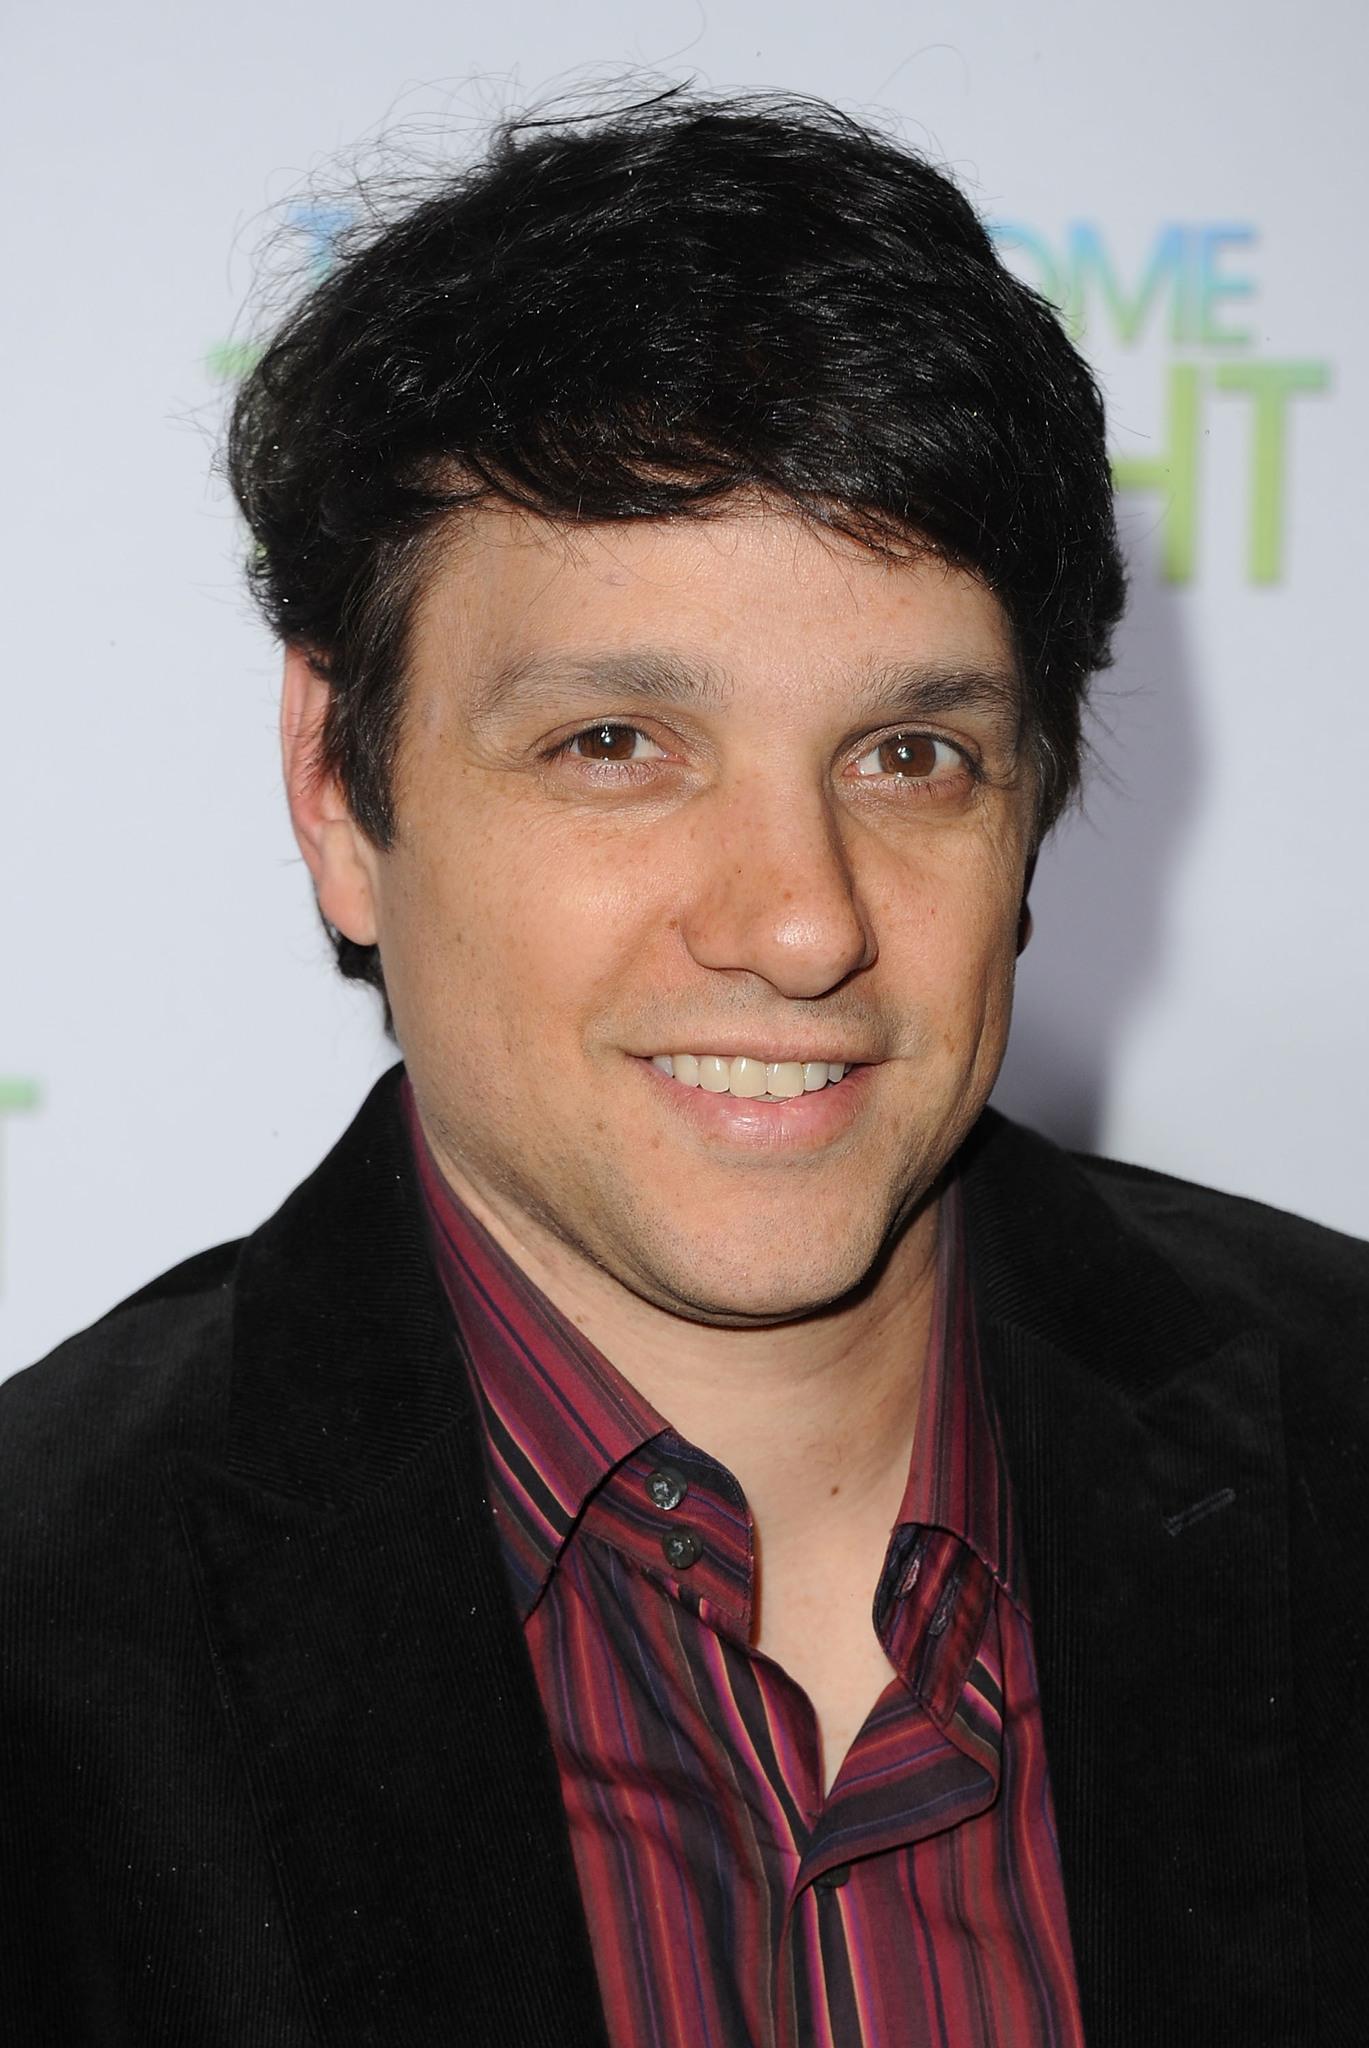 Pictures of Ralph Macchio.